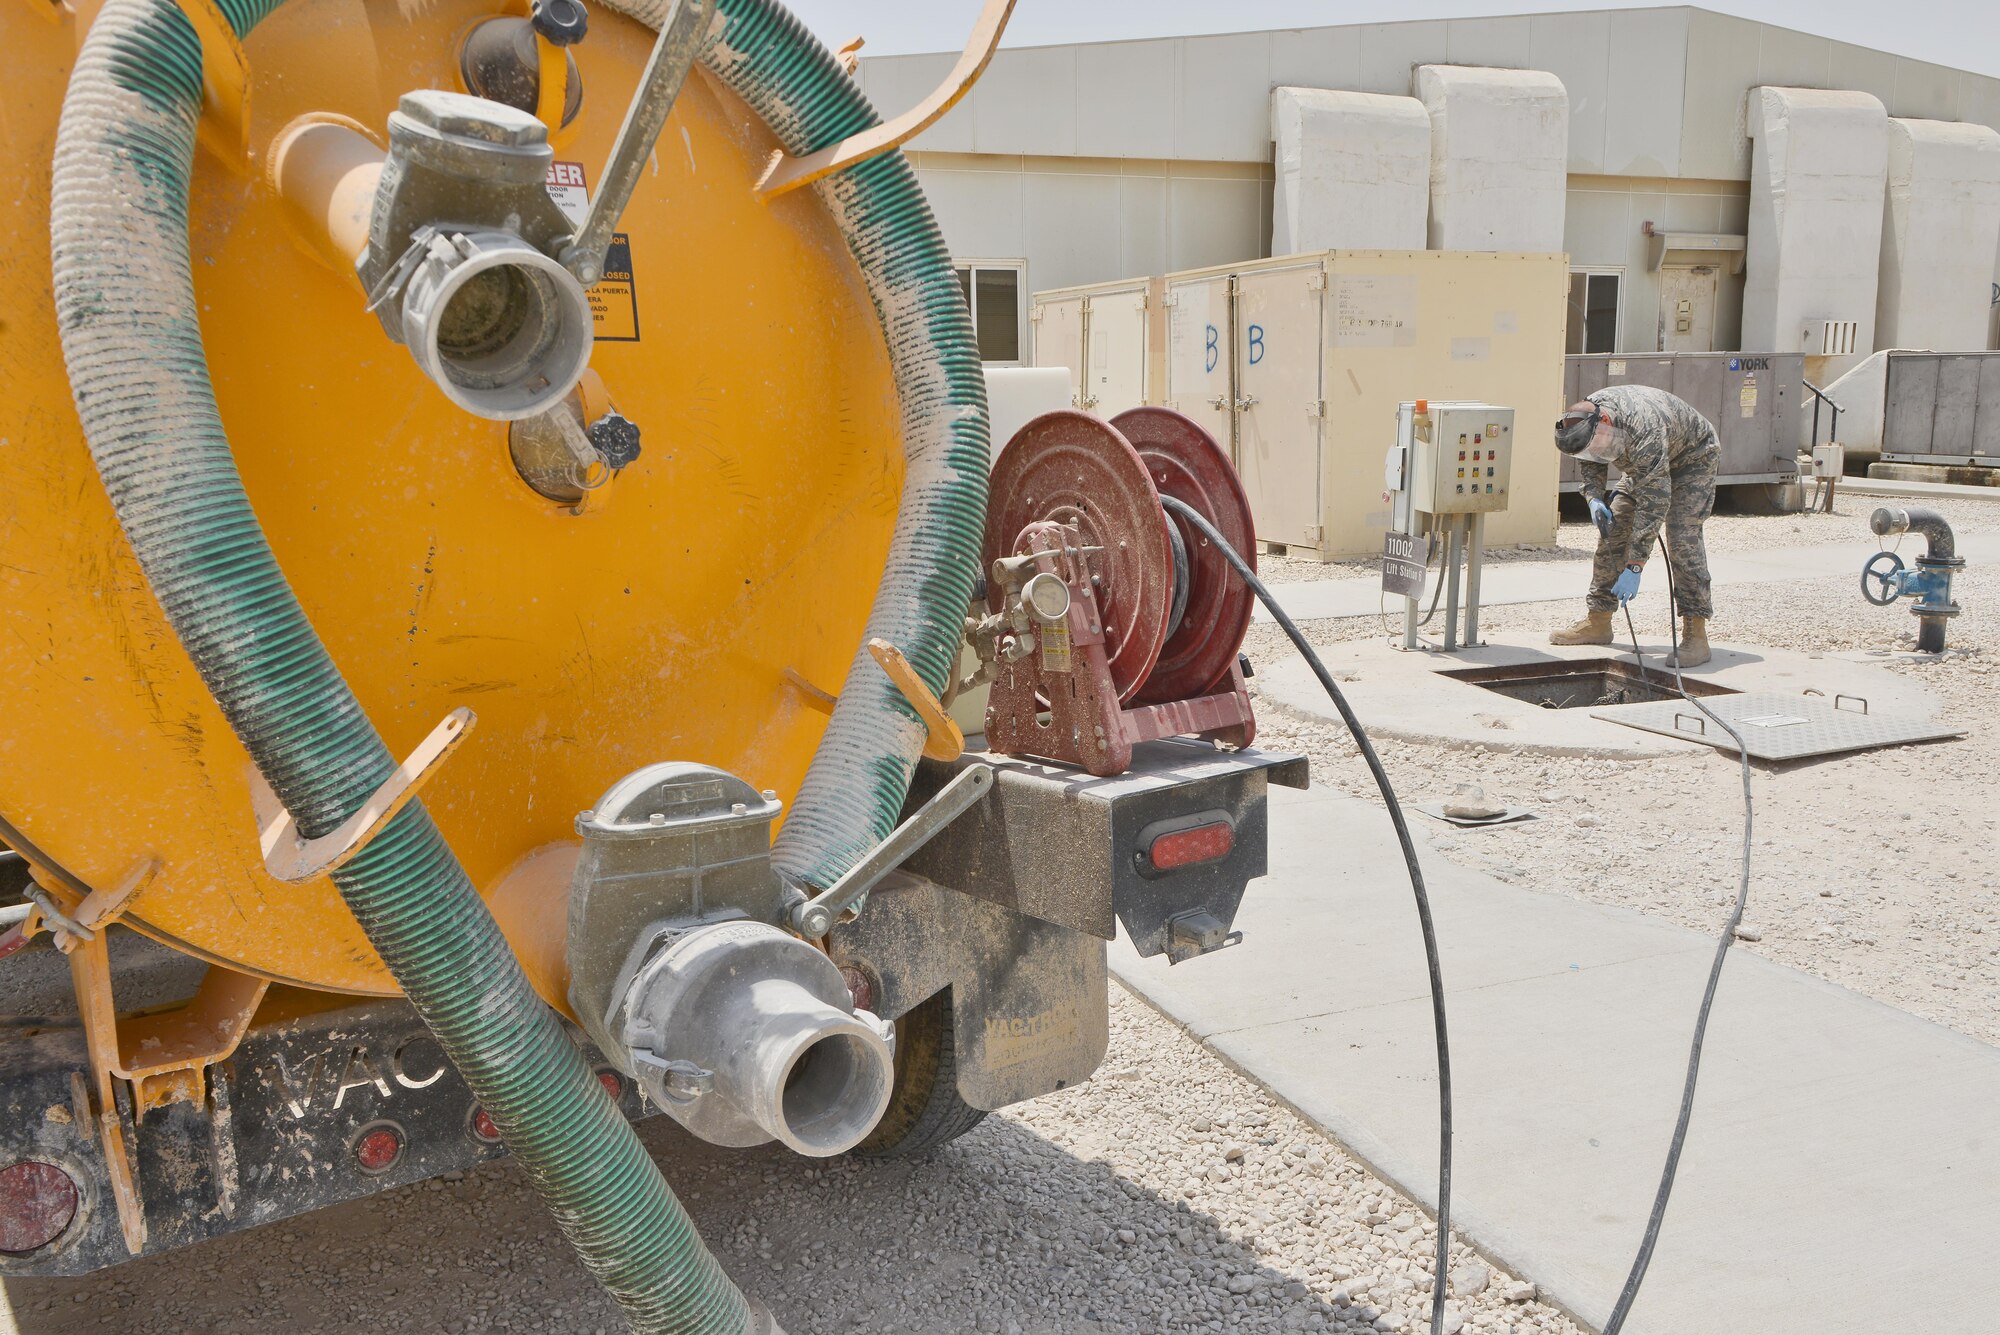 Airman 1st Class Joshua Rickerd, 379th Expeditionary Civil Engineer Squadron water and fuels, sprays down a lift station with water to keep sewage from backing up the plumbing system  August 14, 2015 at Al Udeid Air Base, Qatar. Waste water is tested and monitored daily to ensure the systems are running smoothly and do not back up. With the high number of deployed members here at Al Udeid, the airmen stay busy day and night keeping the septic systems running to support the base. (U.S. Air Force photo/ Staff Sgt. Alexandre Montes)